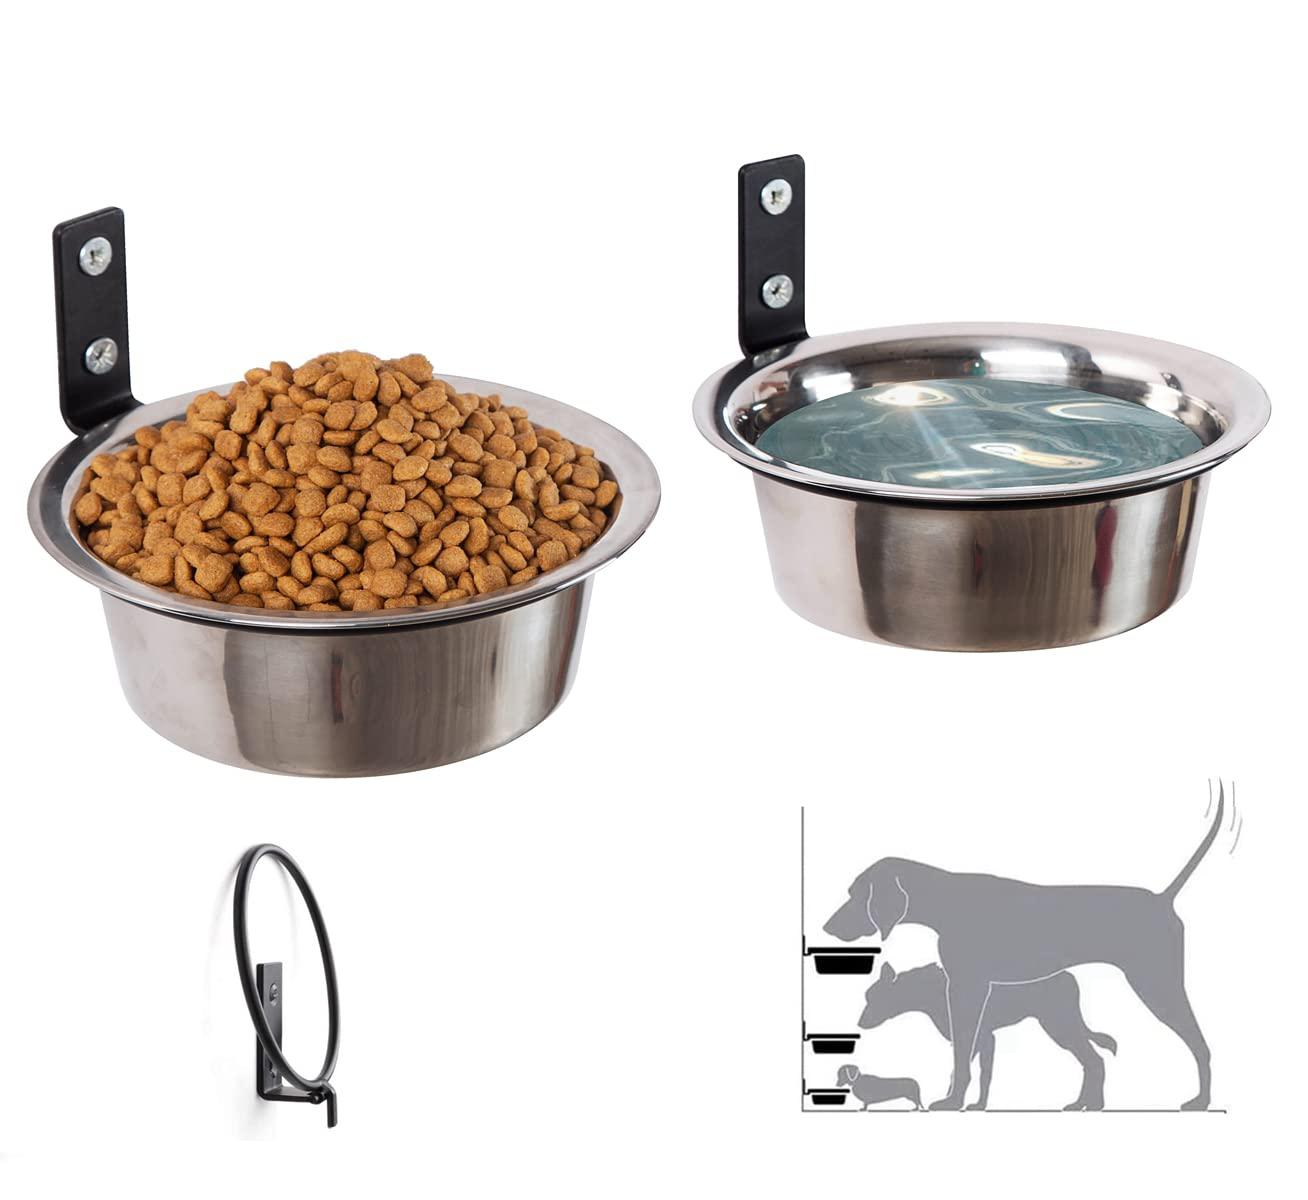 zeckhro elevated dog bowls-2*48 oz wall mounted adjustable elevated heights dog bowl stand-metal elevated pet raised feed bowl, stabl